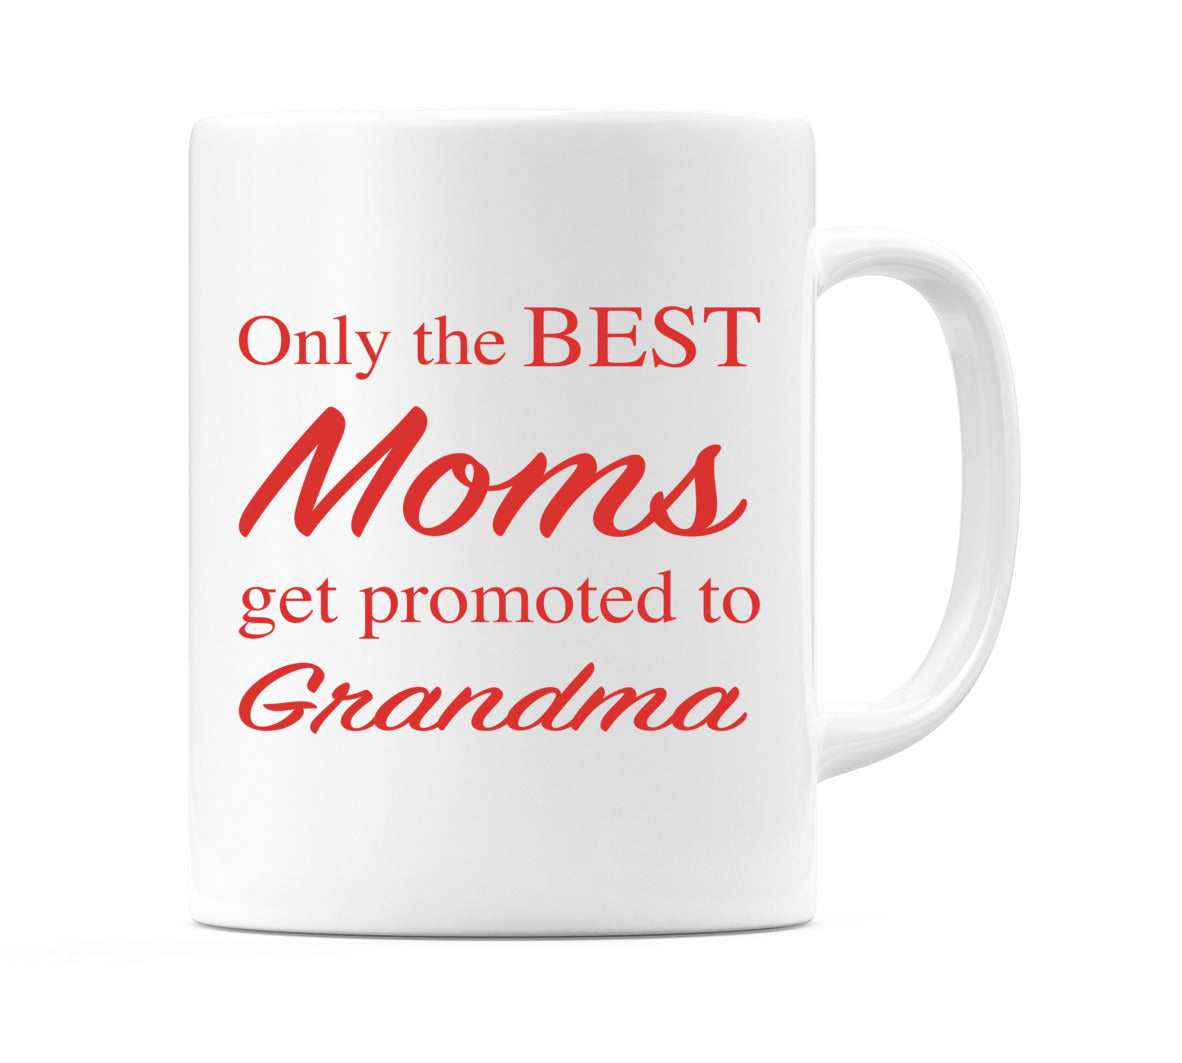 Only the BEST Moms get promoted to Grandma Mug